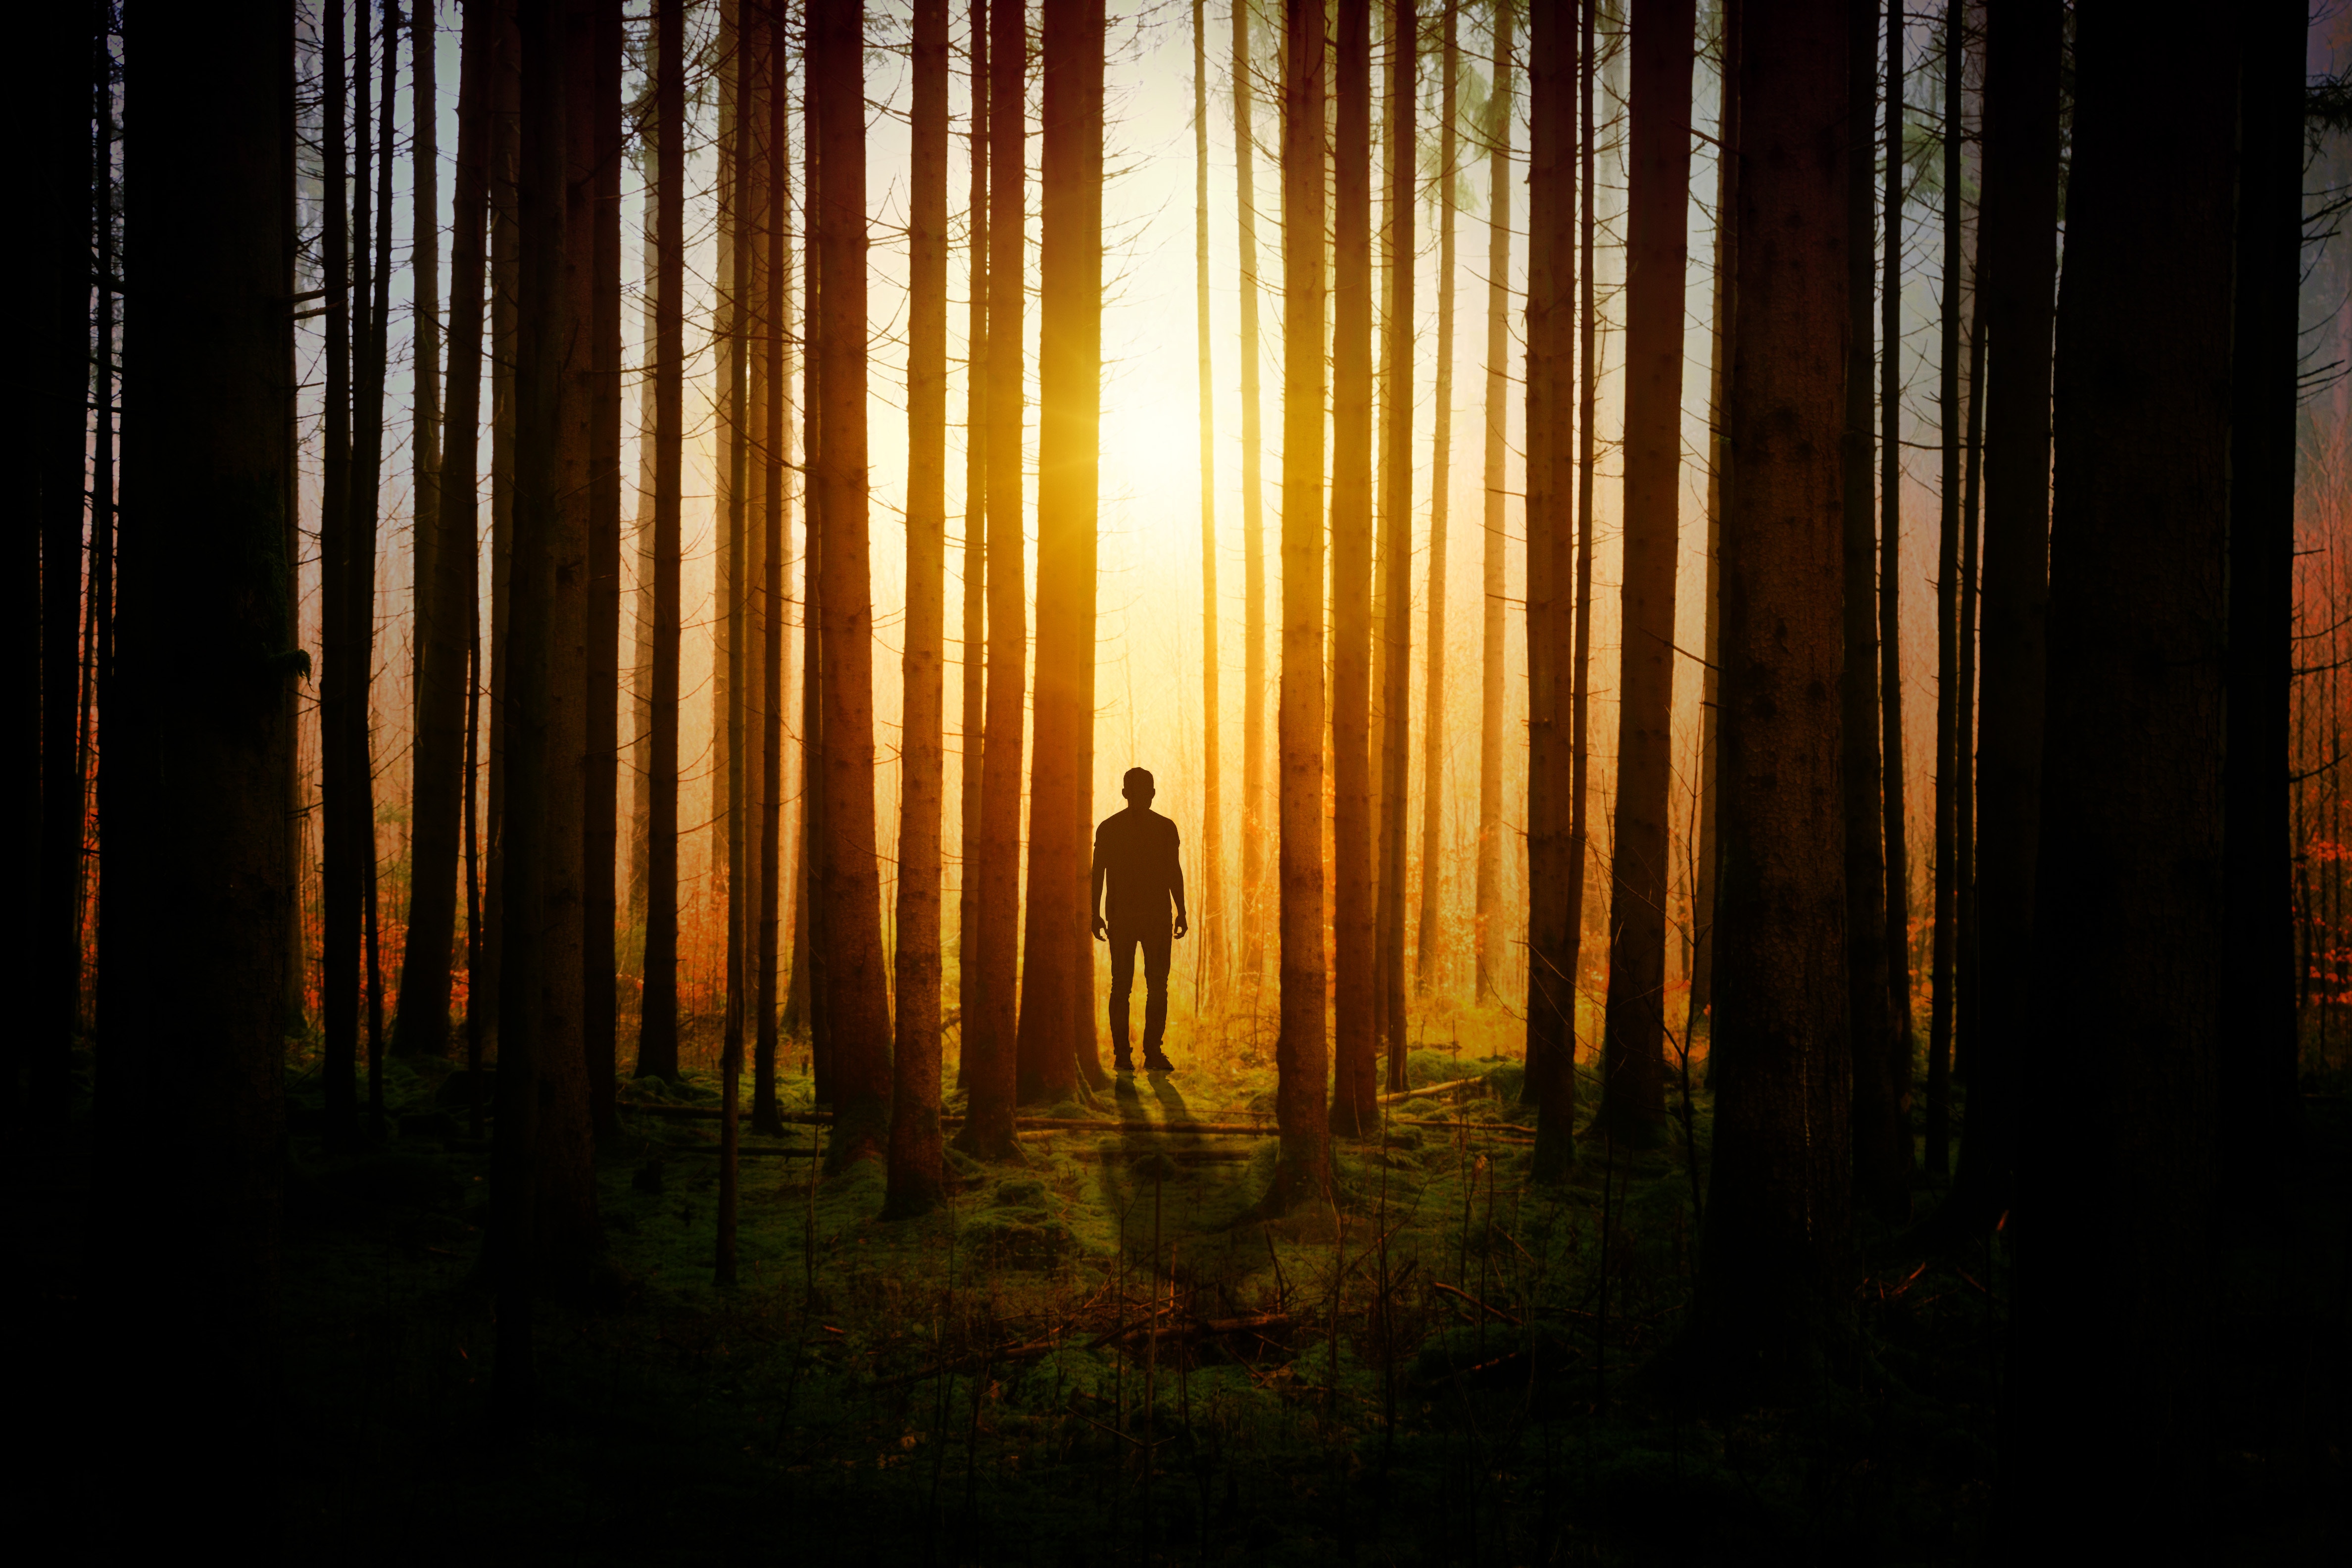 Nature Men Outdoors Men Outdoors Forest Dark Landscape Silhouette Alone Sunrise Shadow Fall Backlit  4752x3168